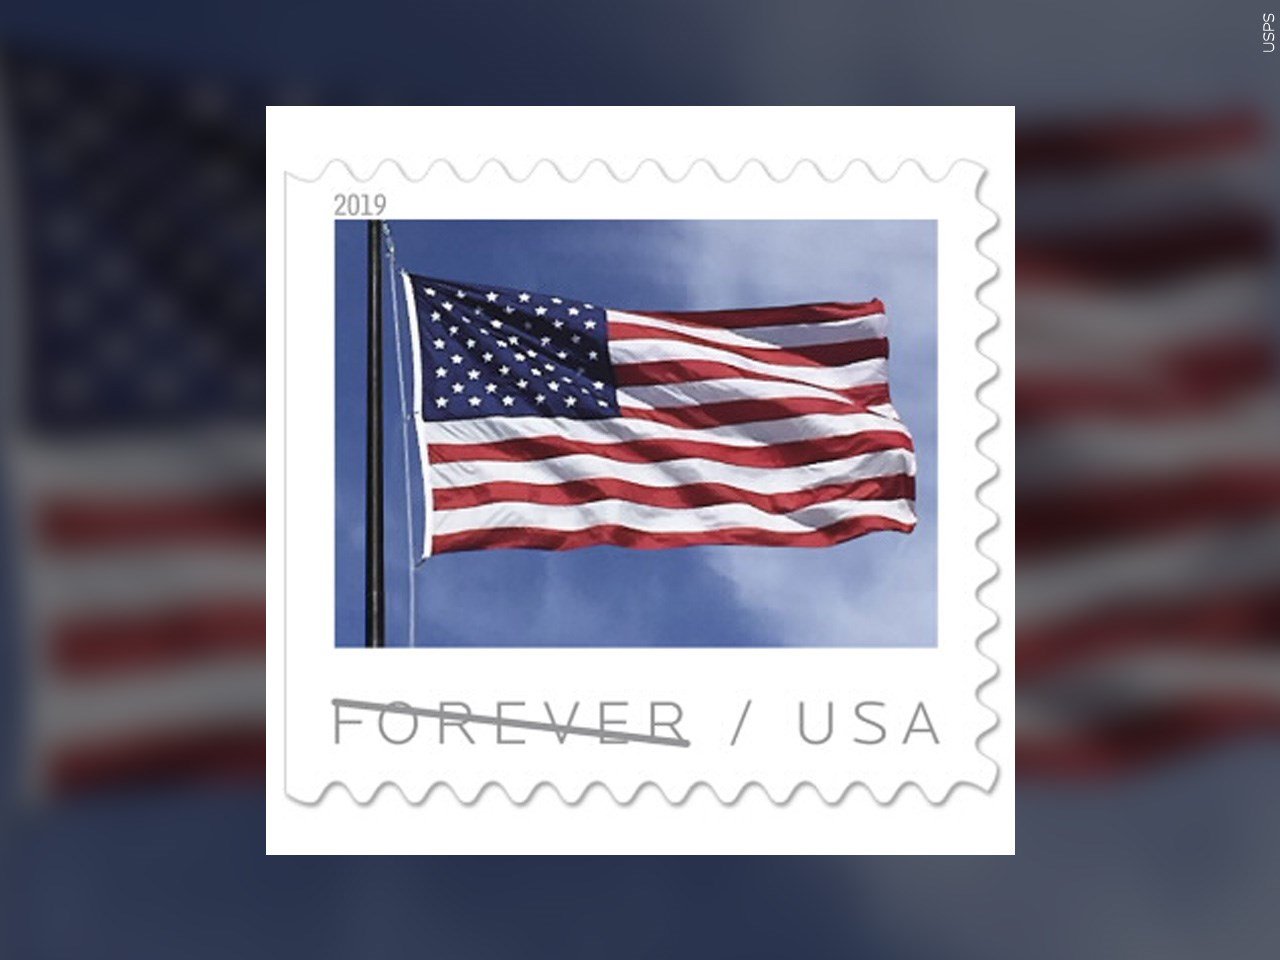 USPS increases price of Forever Stamps